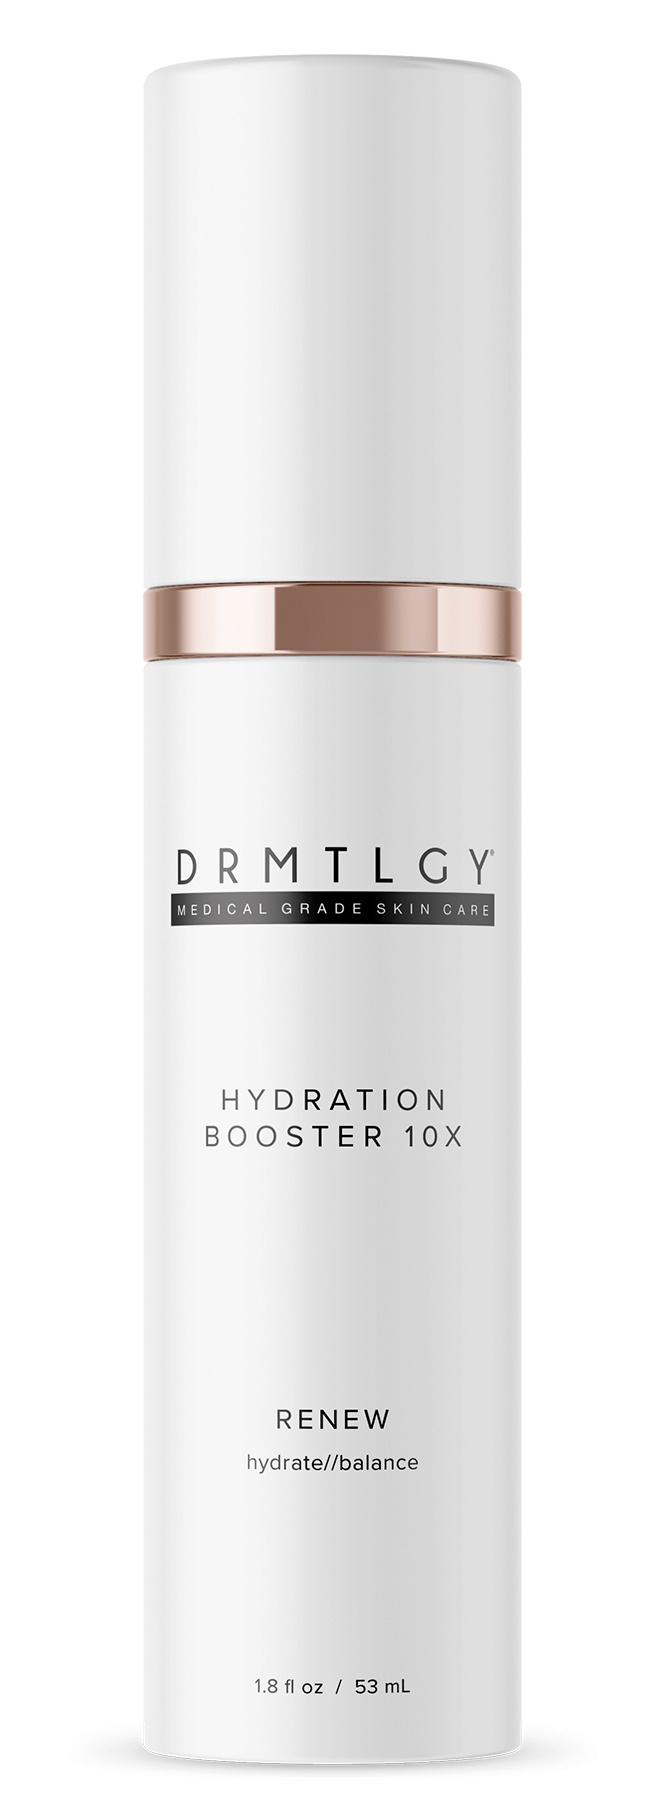 DRMTLGY Hydration Booster 10x